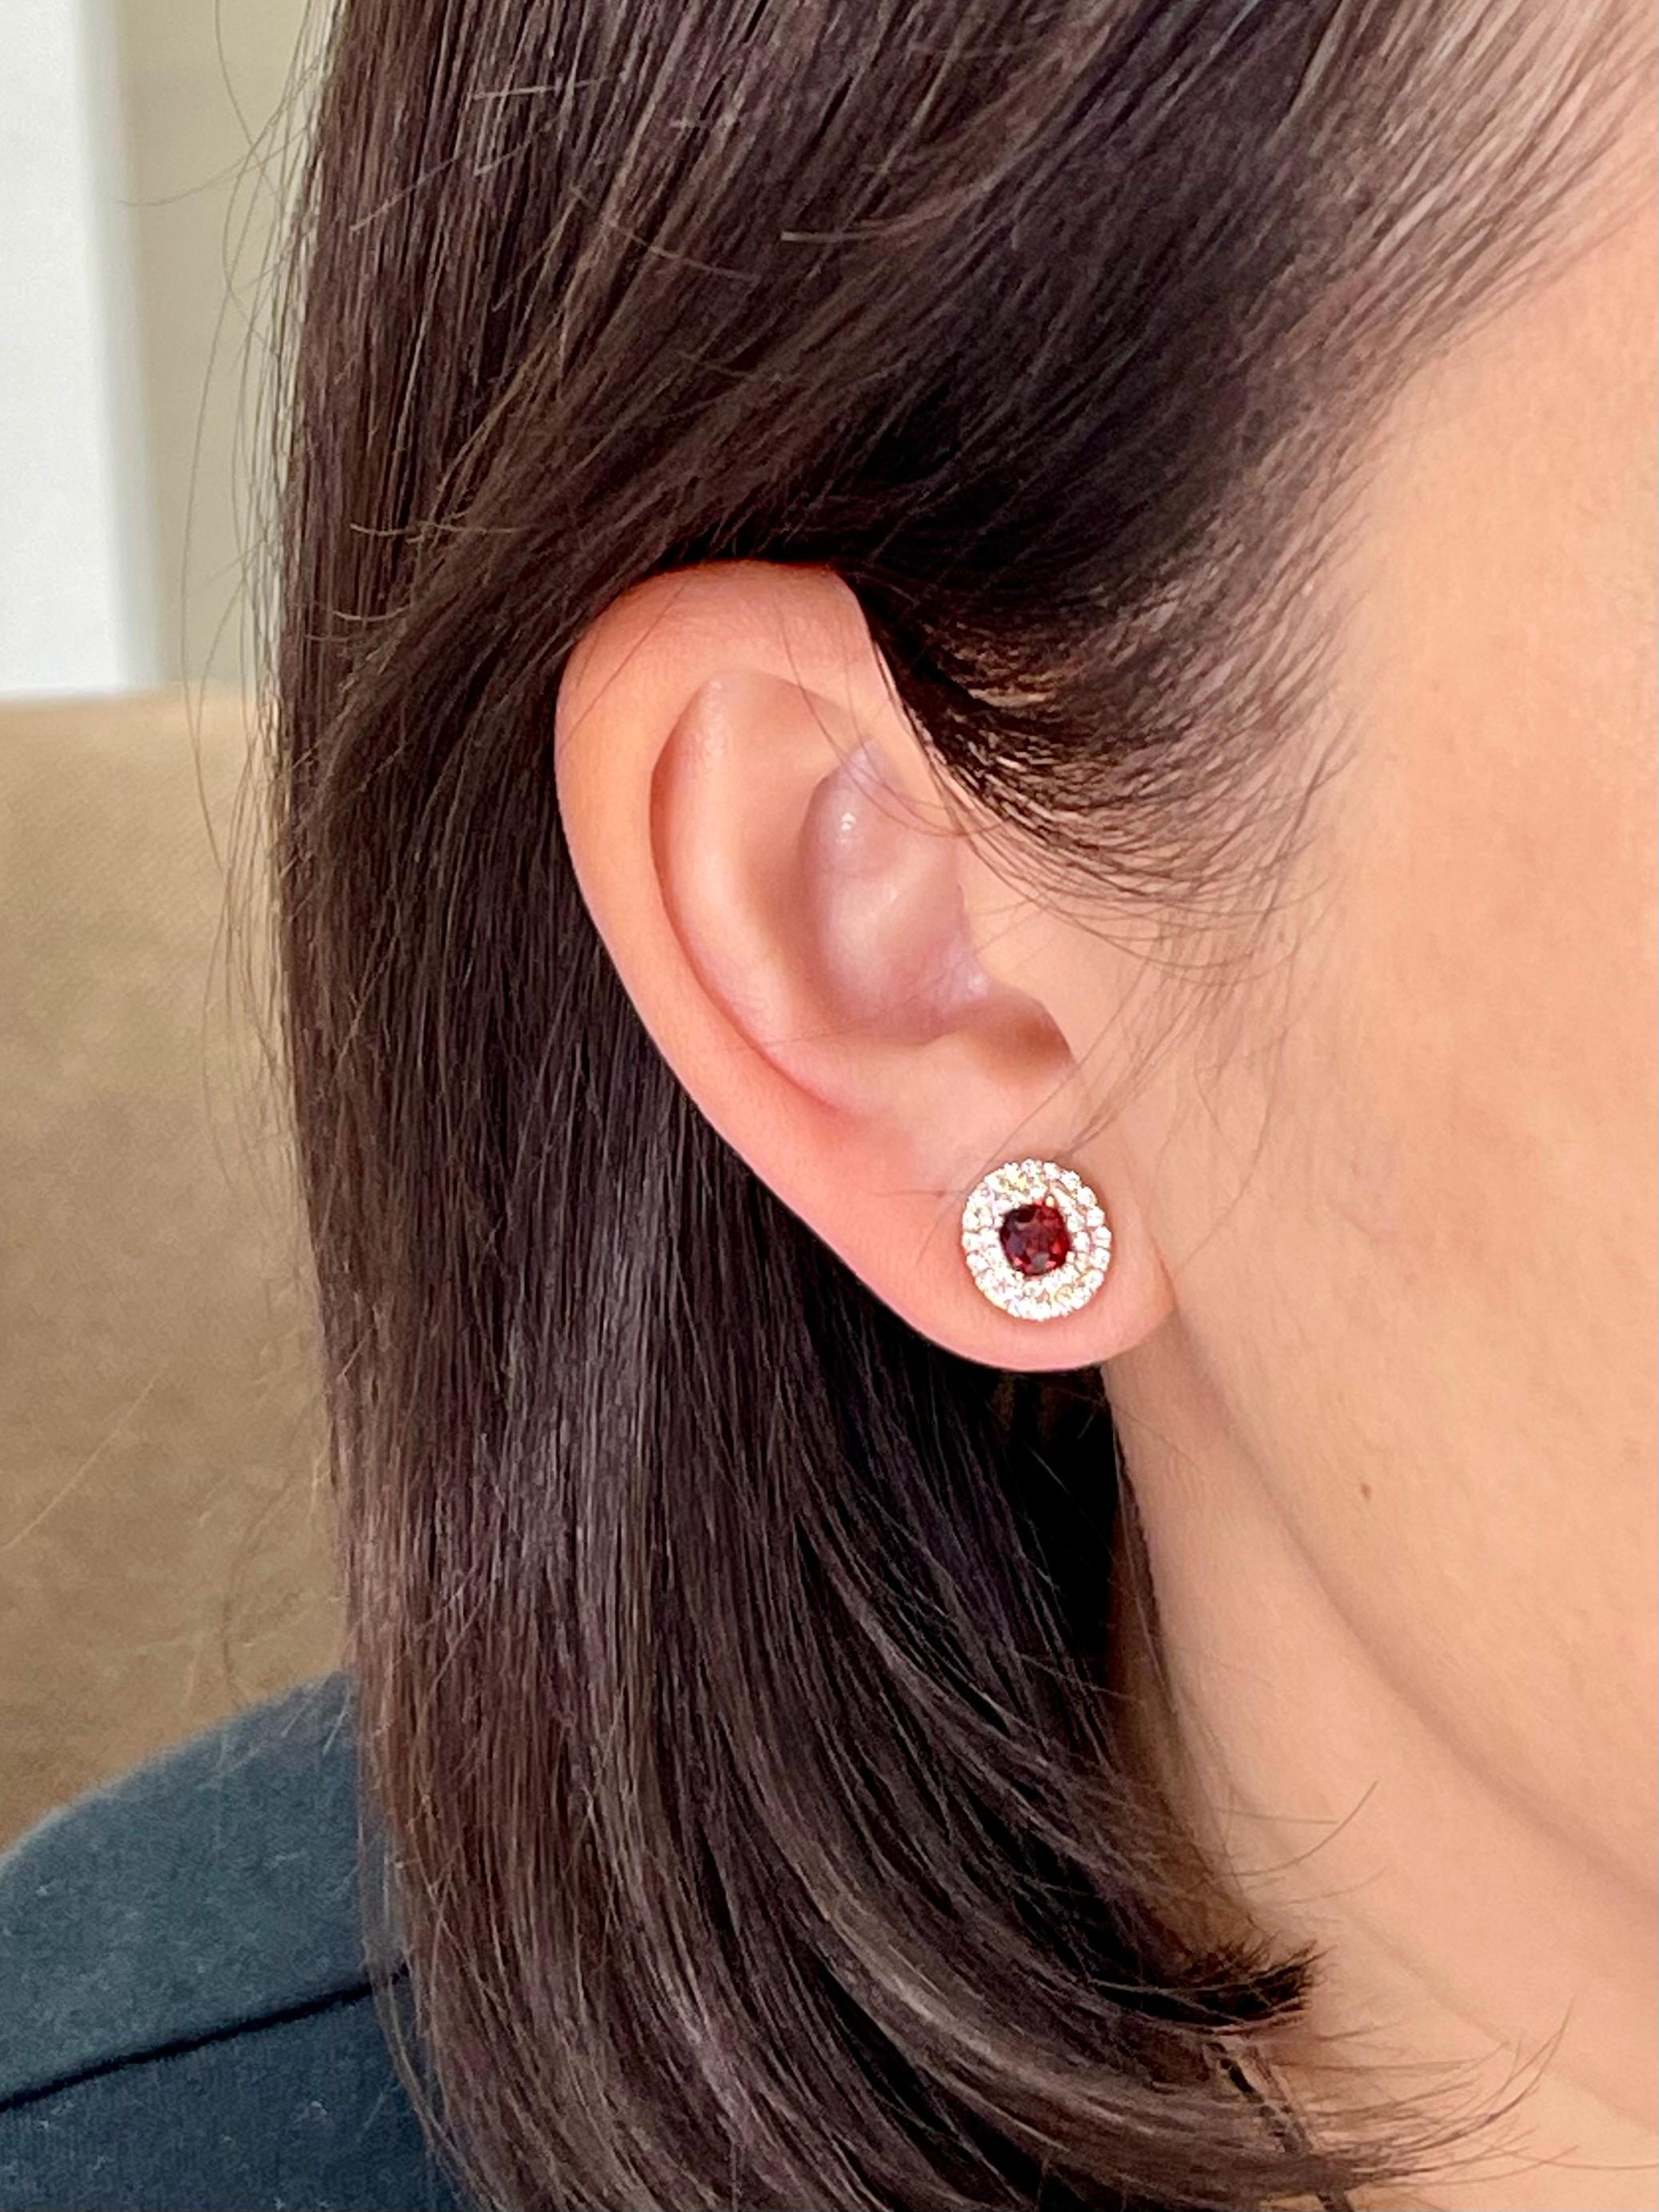 Please check out the HD video. Here is a pair of glowing vivid red spinel stud earrings. The earrings is set in 18k rose gold and diamonds. There are 0.49Cts of round brilliant full cut diamonds in this double halo setting. The two vivid spinels